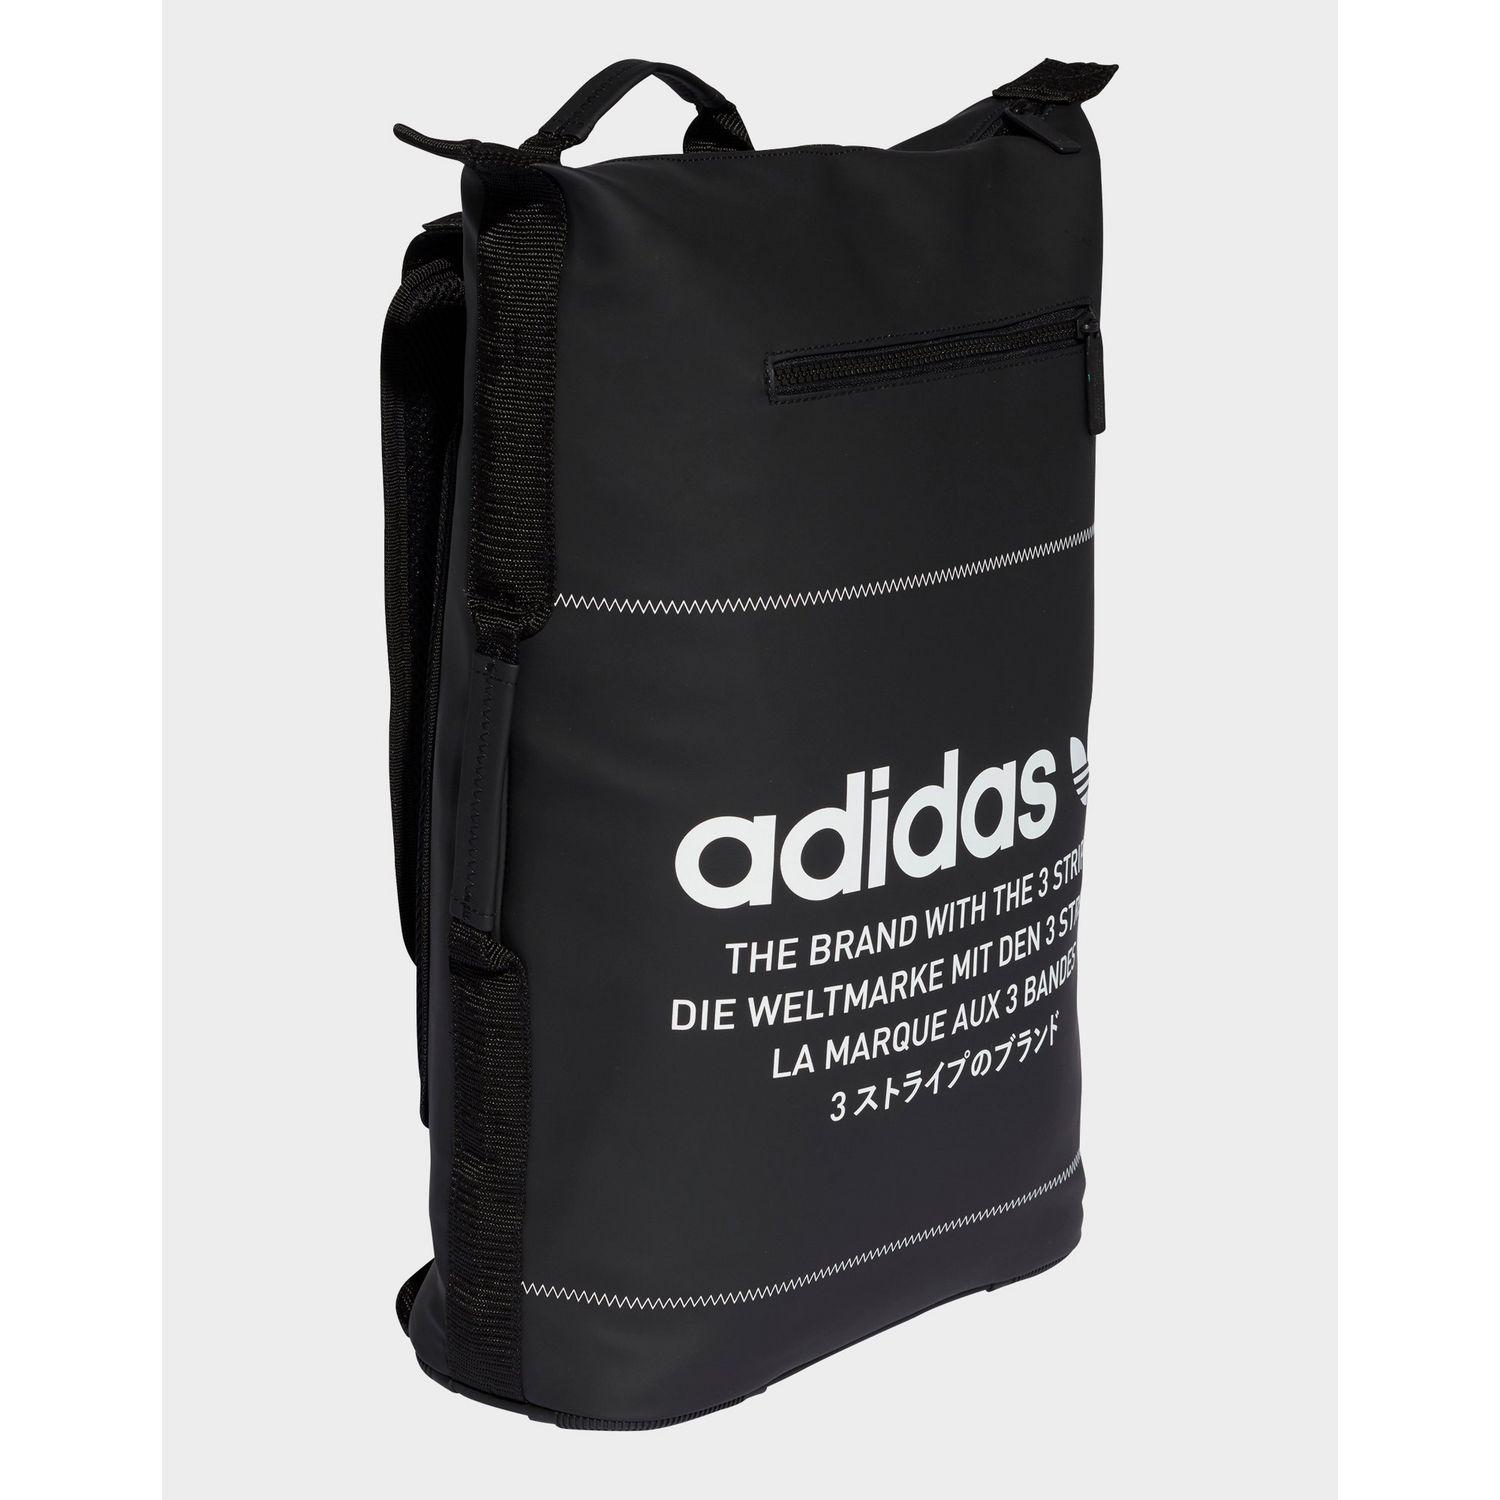 adidas Synthetic Nmd Backpack in Black 